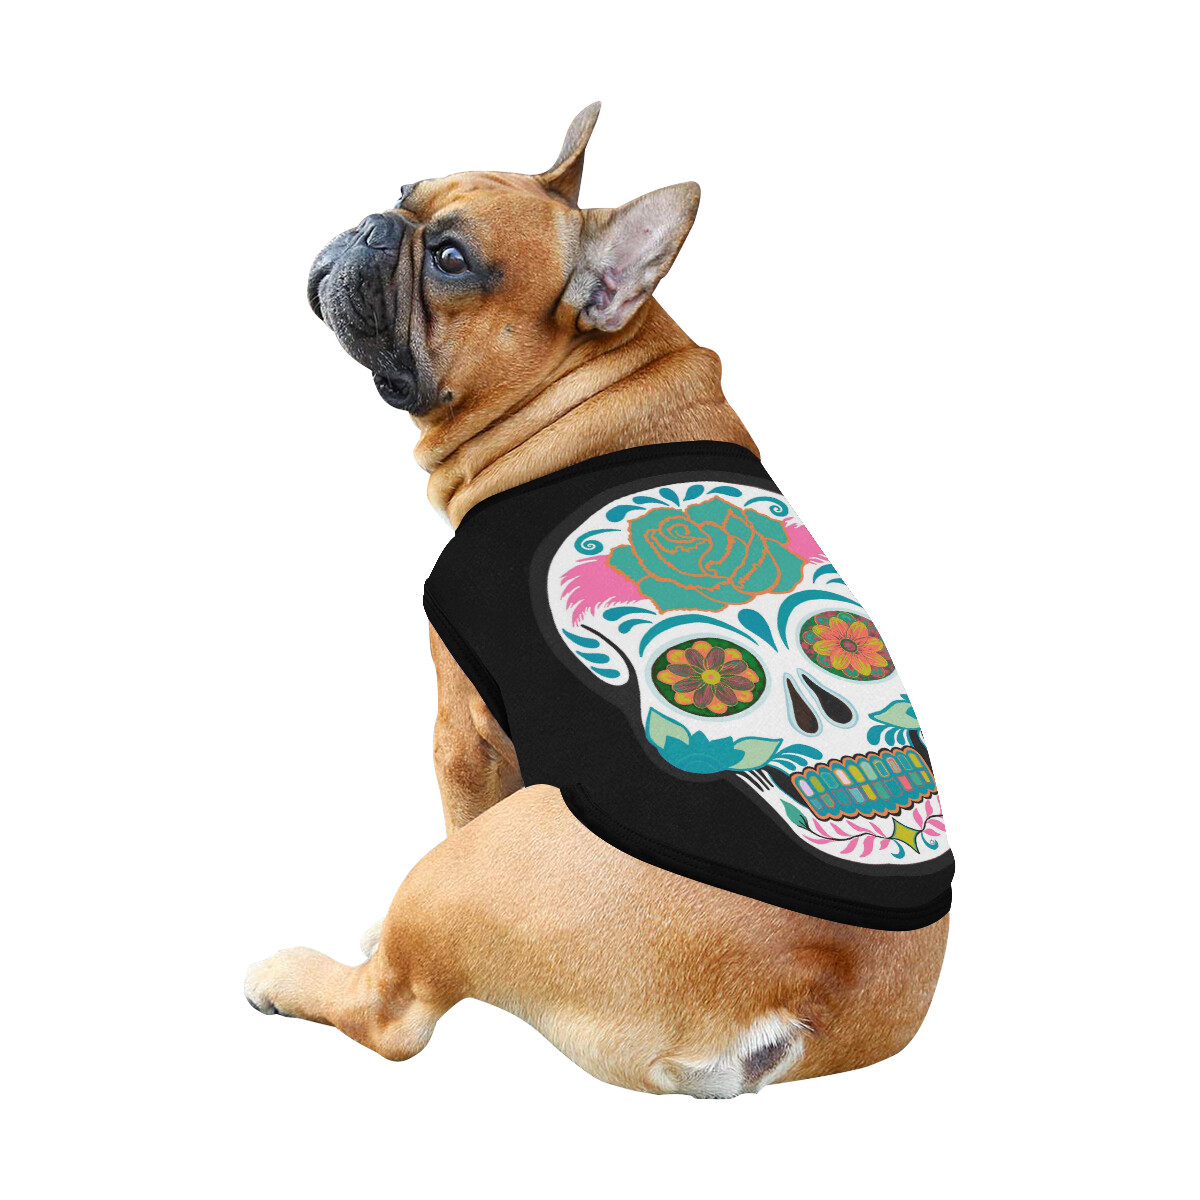 🐕 Skull Day of the dead Dog Dog shirt, Dog Tank Top, Dog t-shirt, Dog clothes, Gifts, front back print, 7 sizes XS to 3XL, dog gifts, 32 colors, black